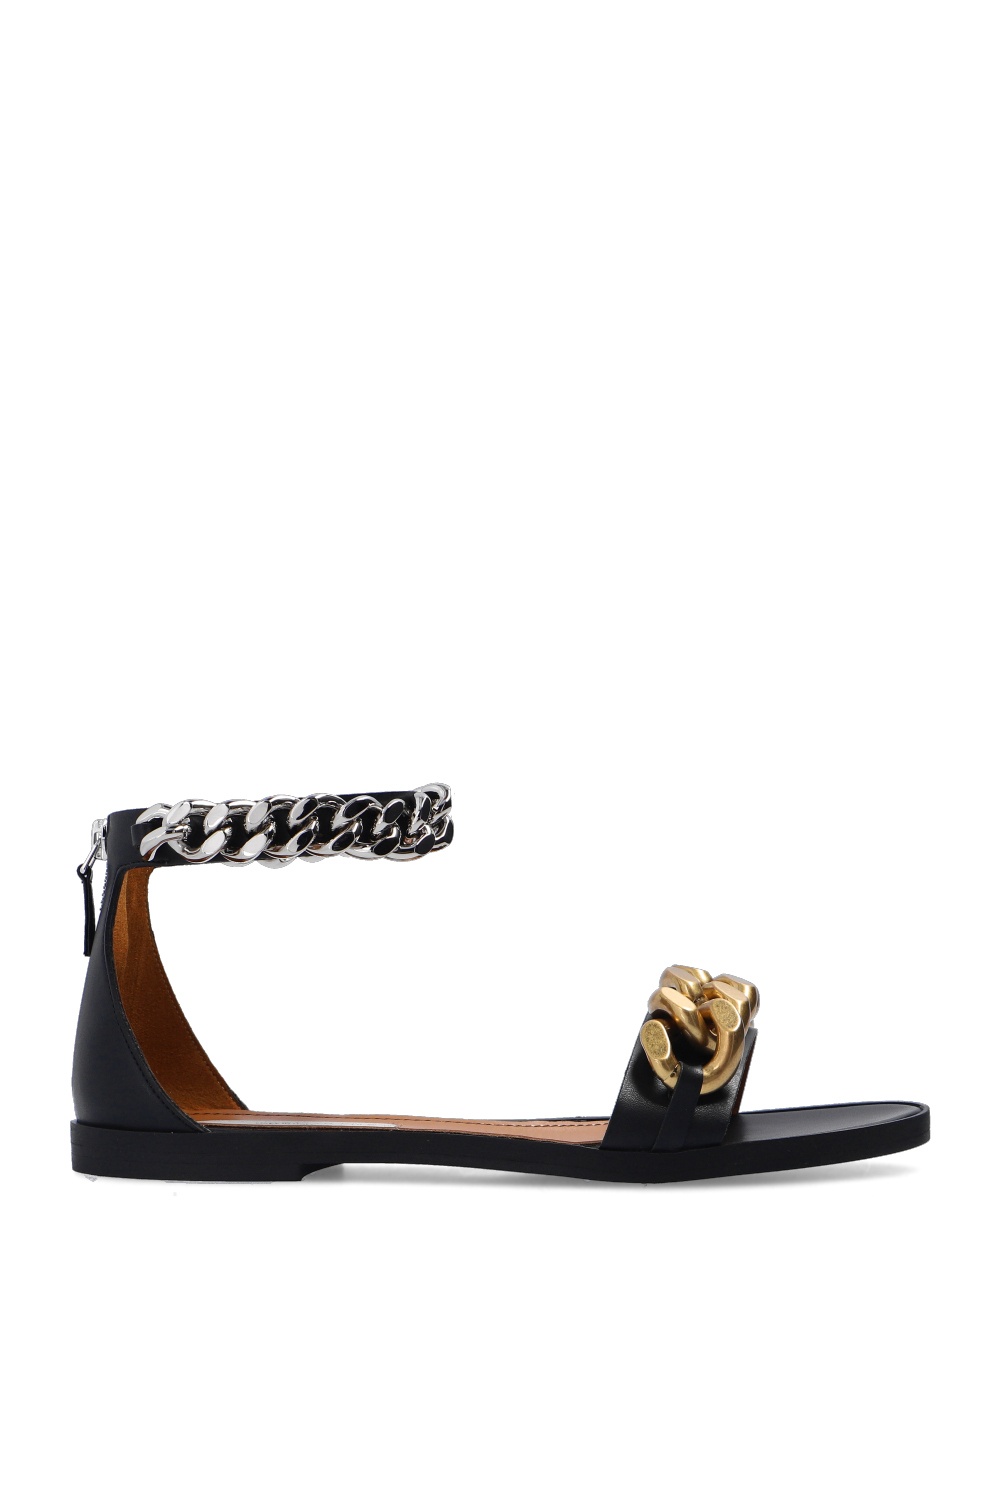 Stella McCartney Sandals with chains | Women's Shoes | Vitkac